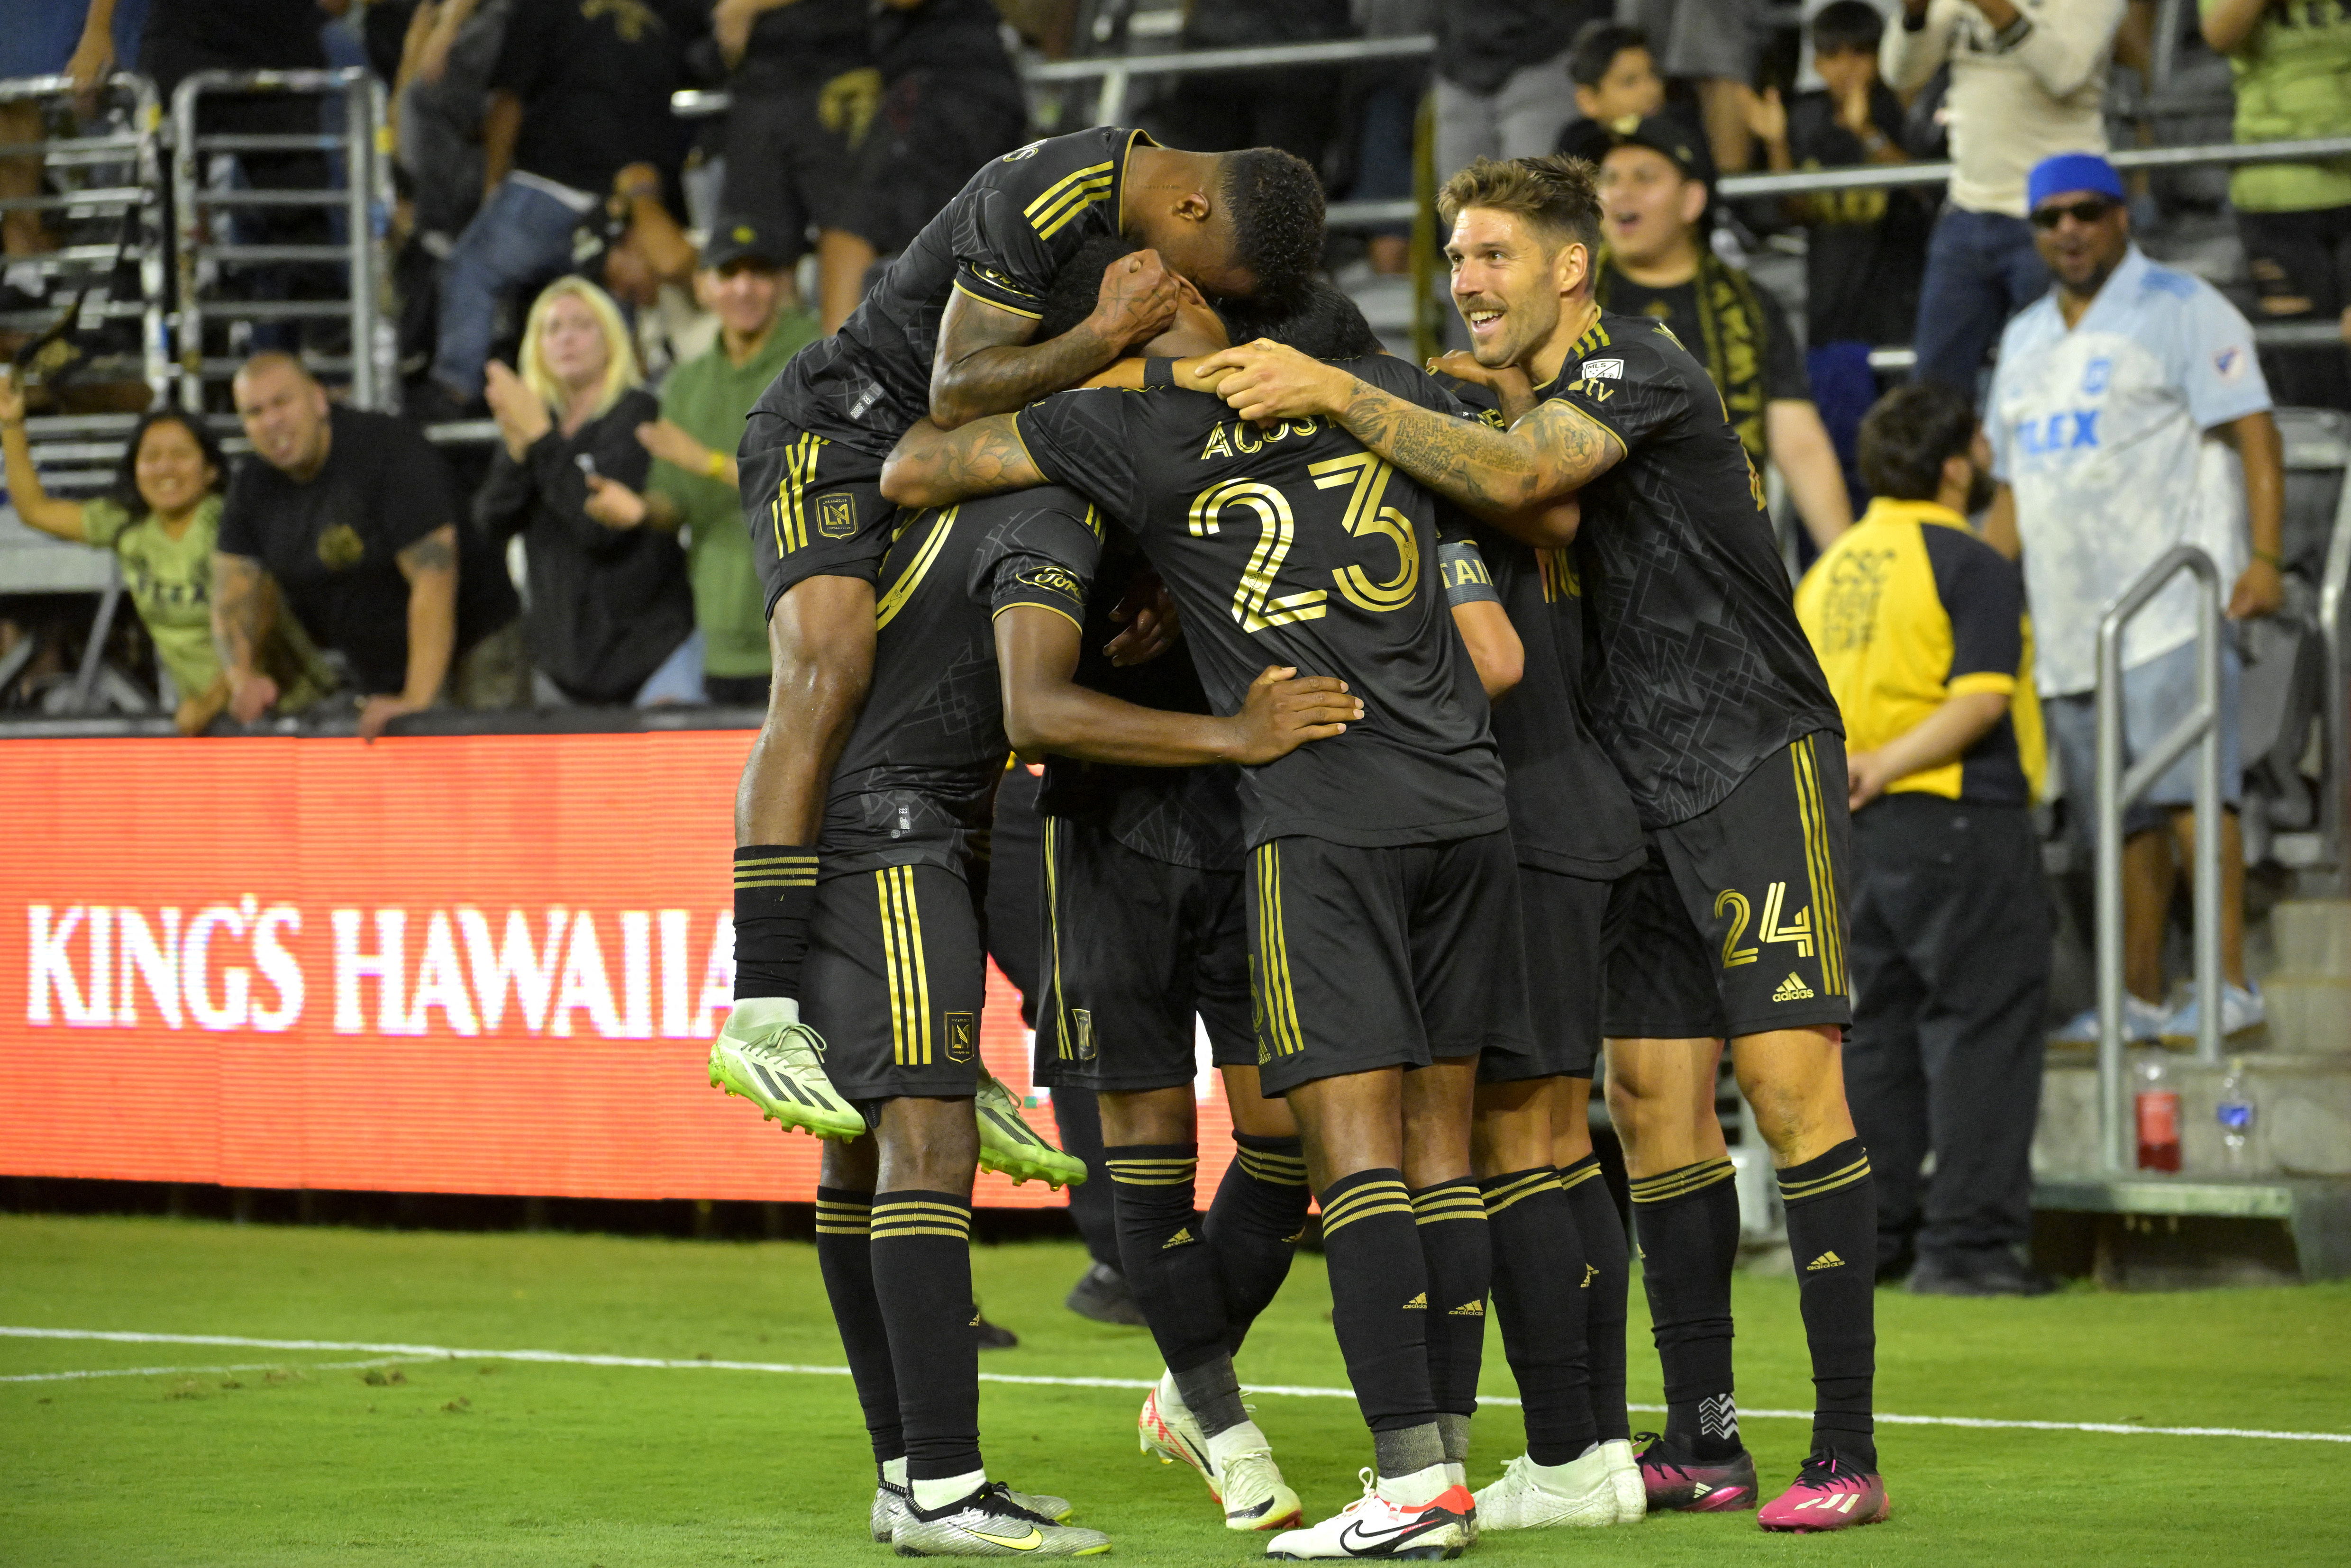 Goals and Highlights: LAFC 7-1 FC Juarez in Leagues Cup